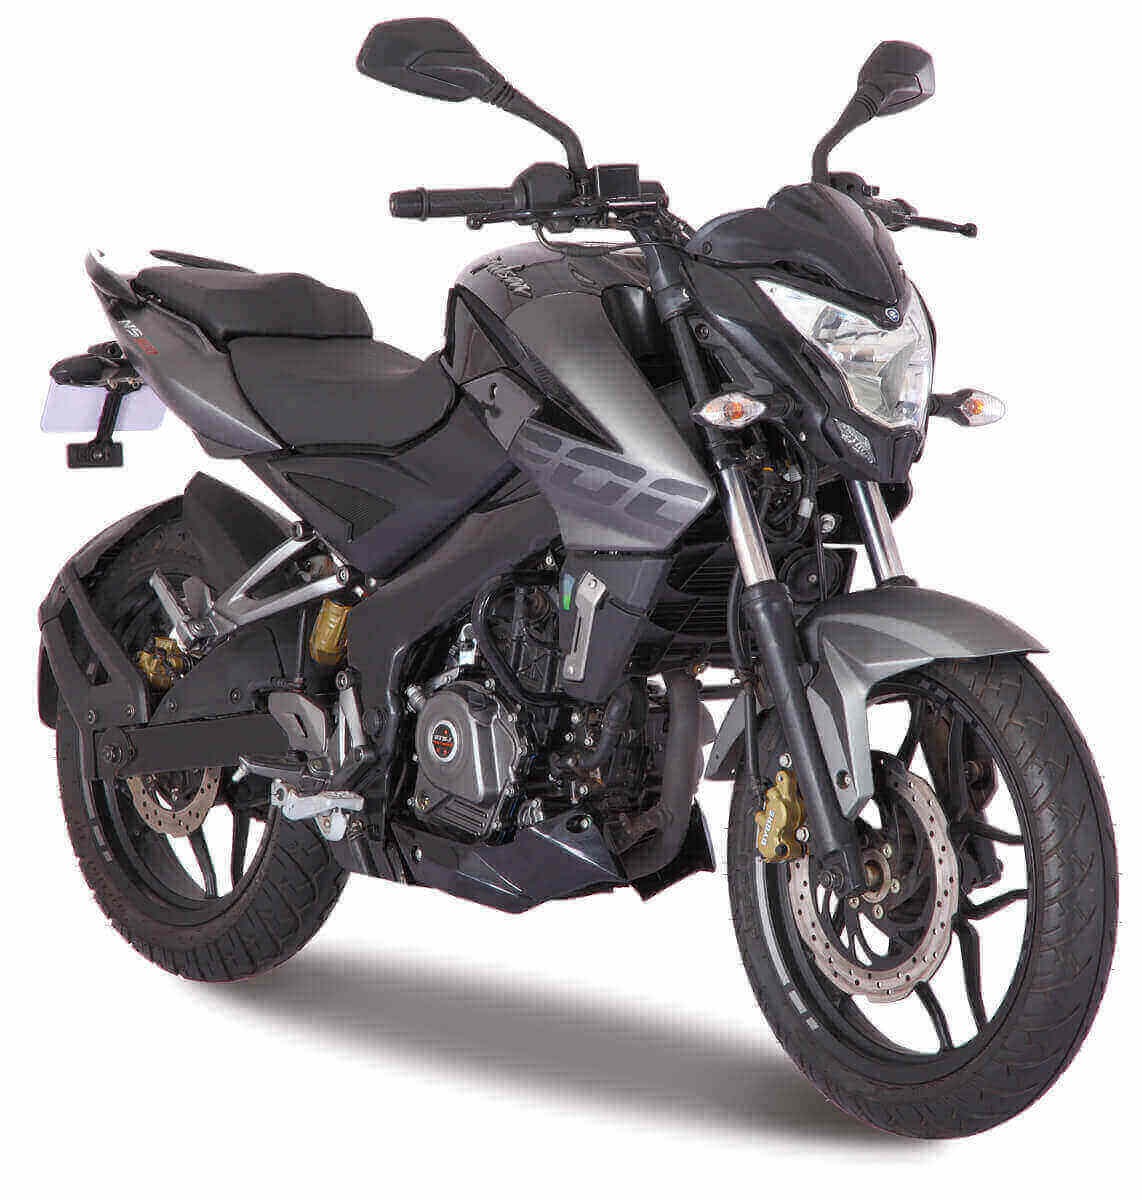 2018 Bajaj Pulsar NS200 ABS Launched - Price, Engine 